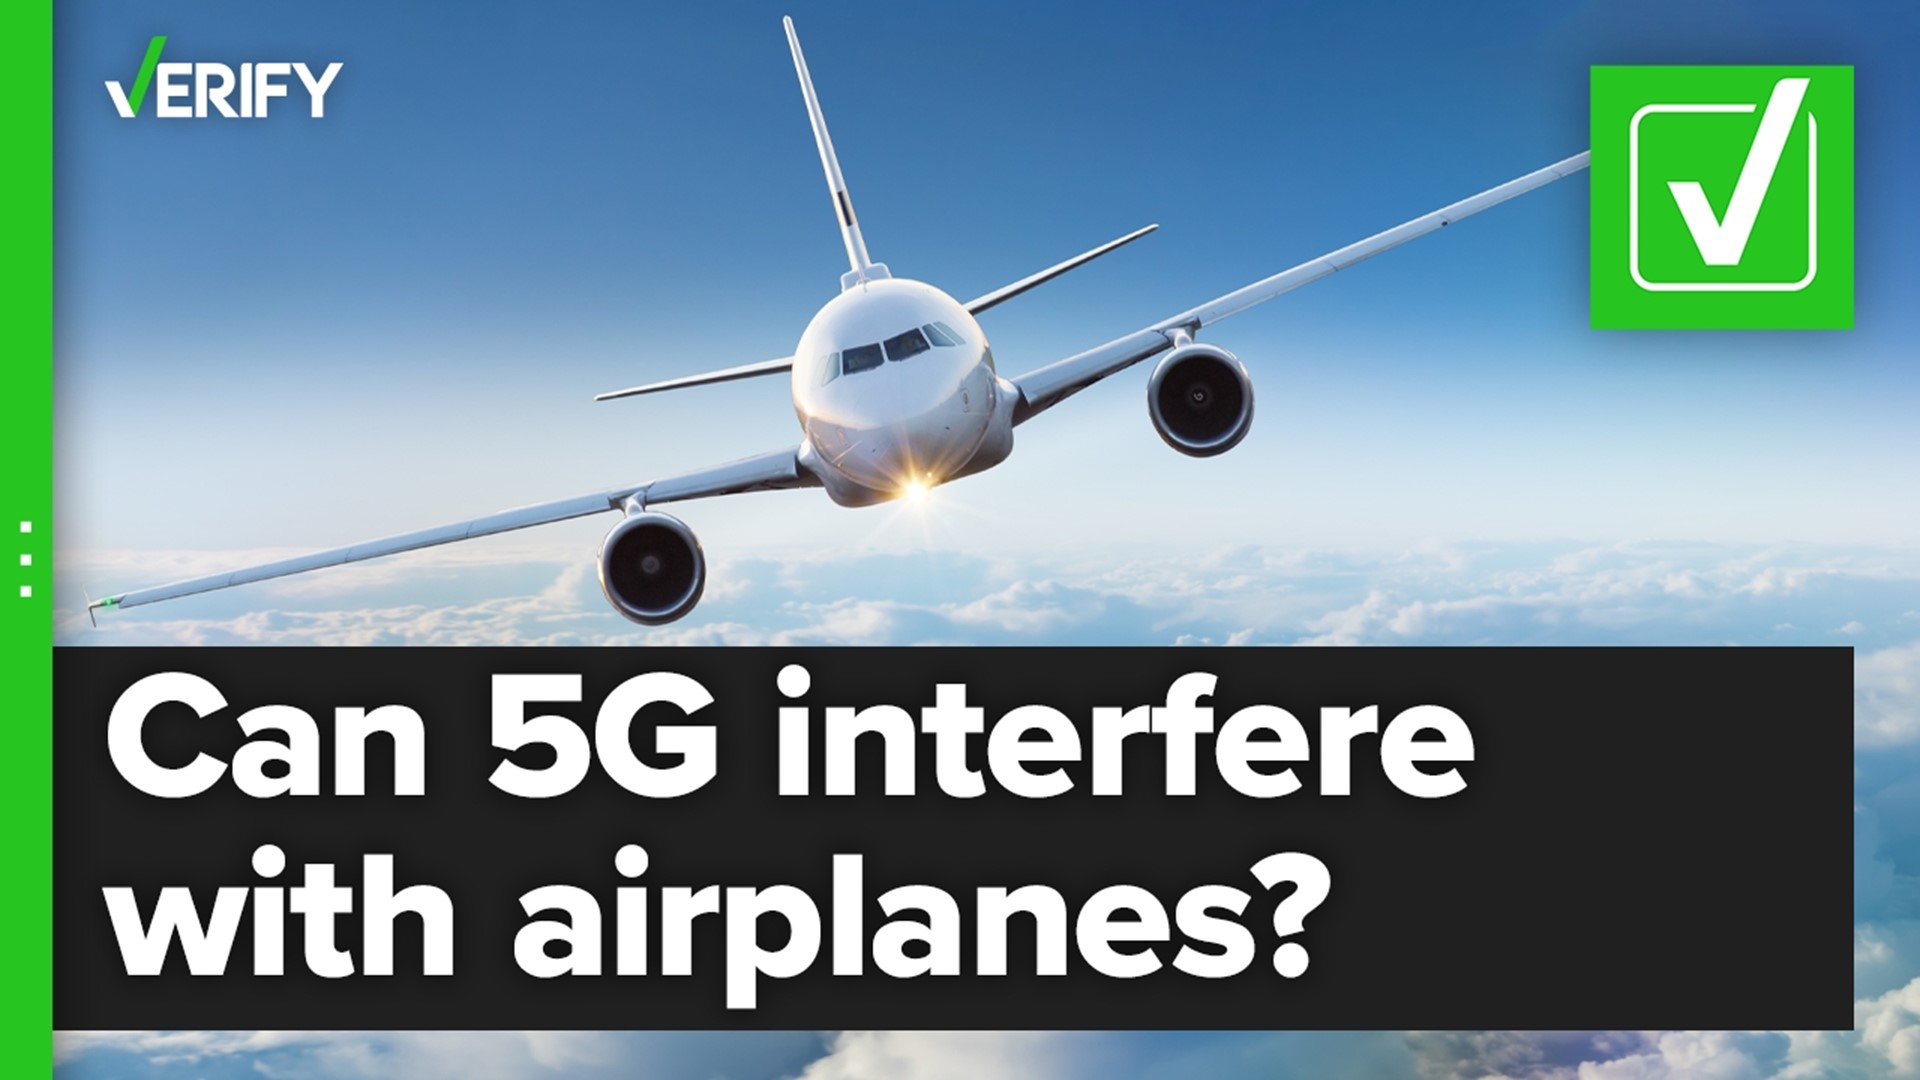 The FAA has raised concerns about the impact 5G expansion nationwide could have on airplane equipment.